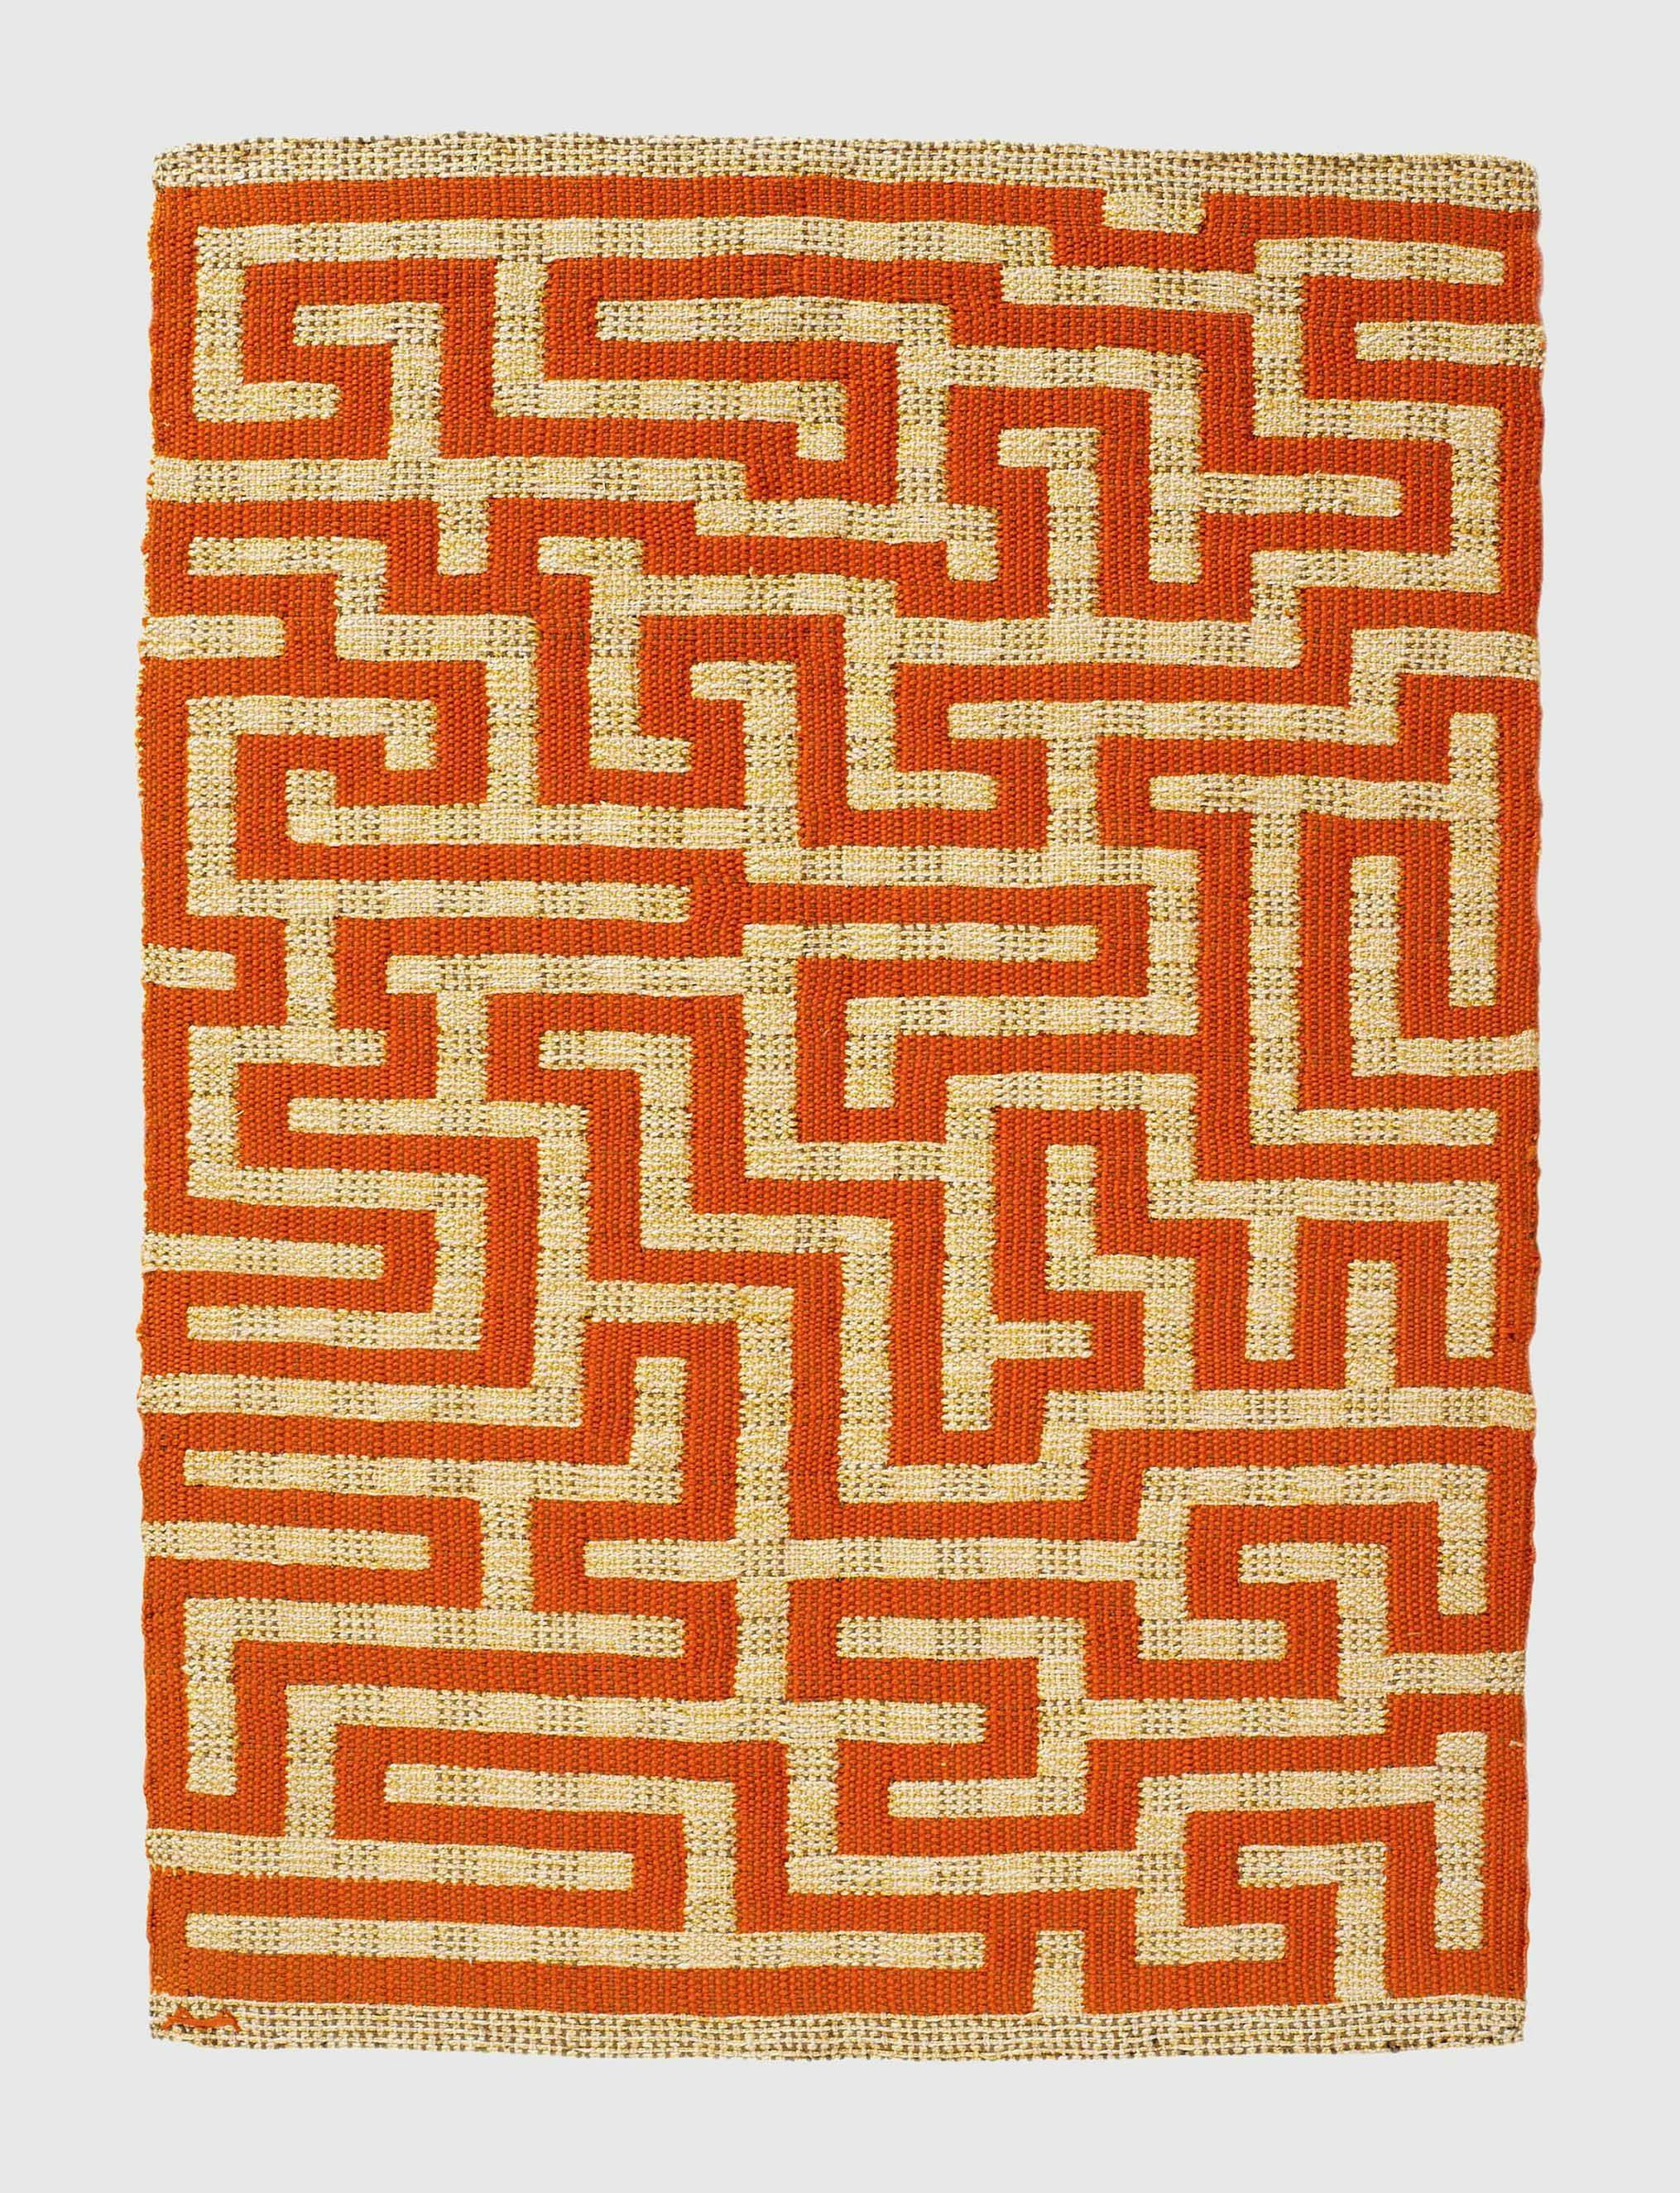 A textile by Anni Albers titled Red Meander, dated 1954.